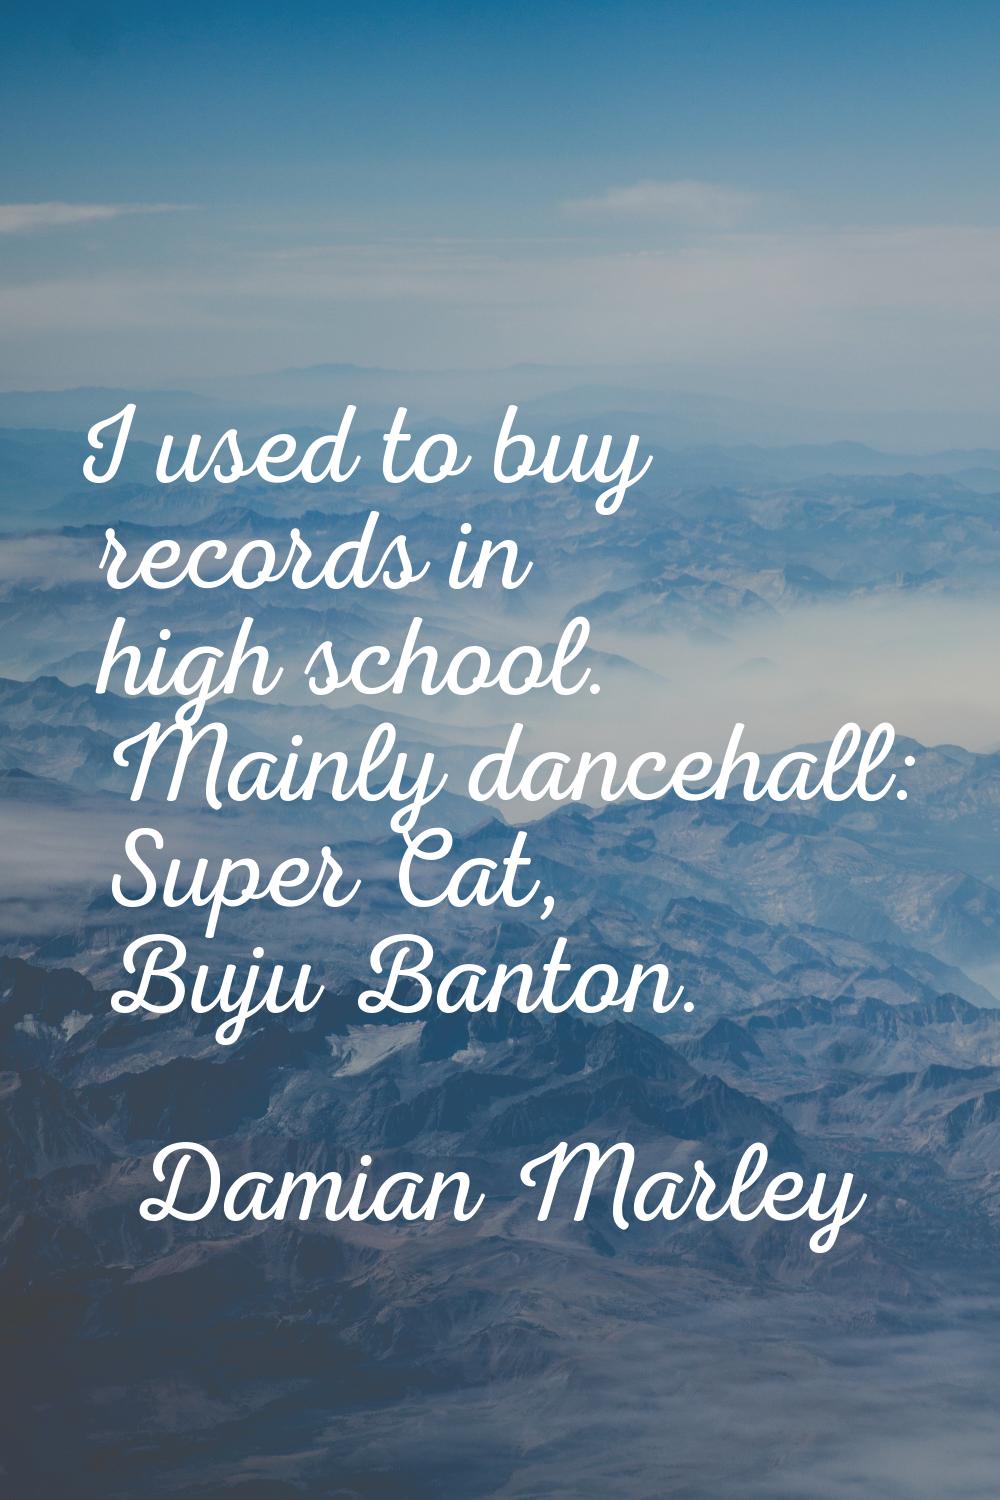 I used to buy records in high school. Mainly dancehall: Super Cat, Buju Banton.